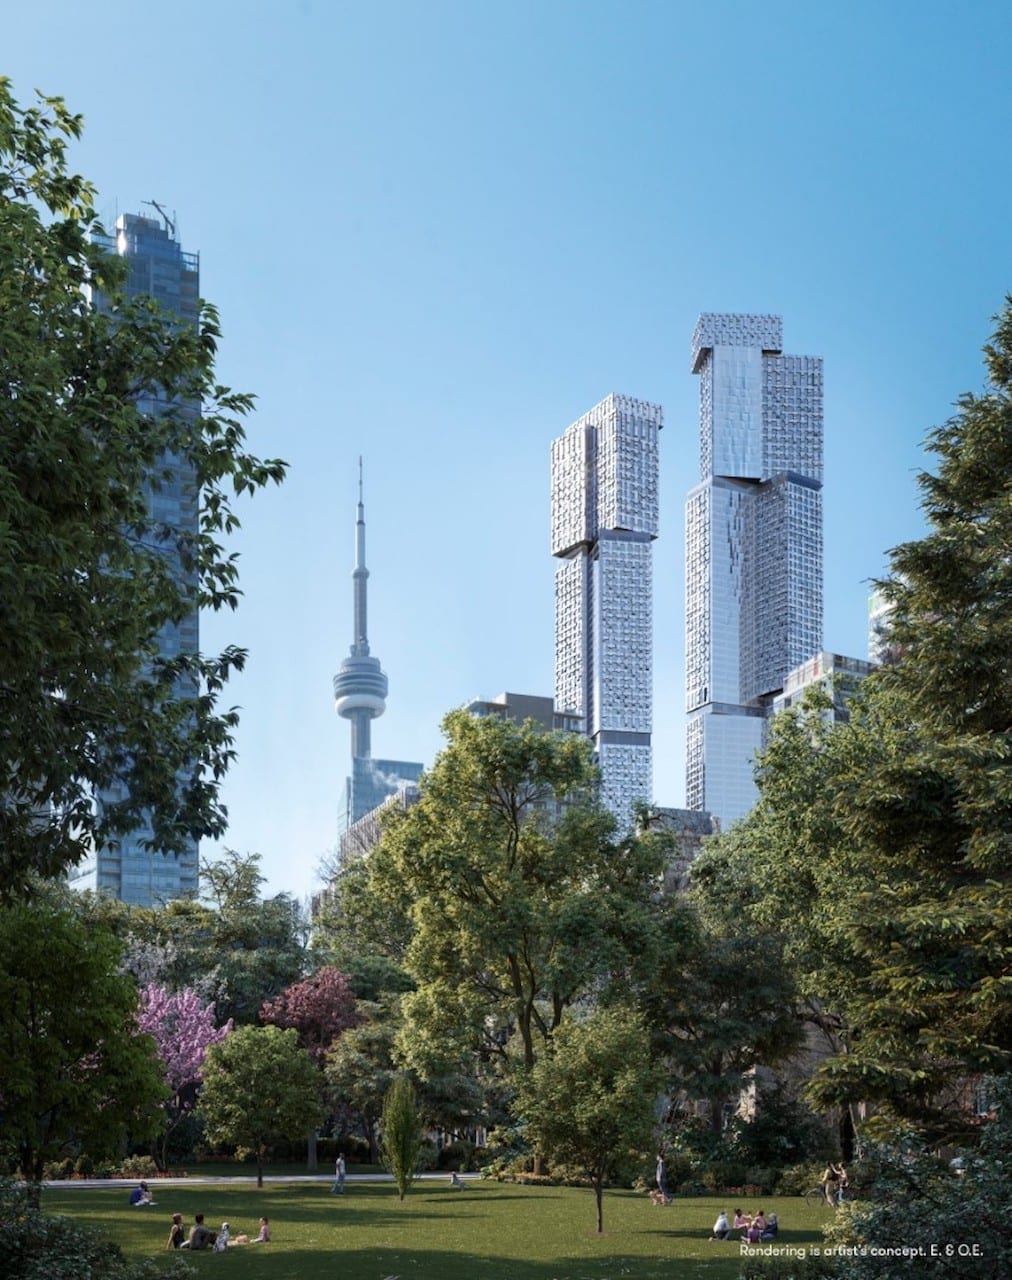 Rendering of Forma Condos exterior view from garden of osgoode hall